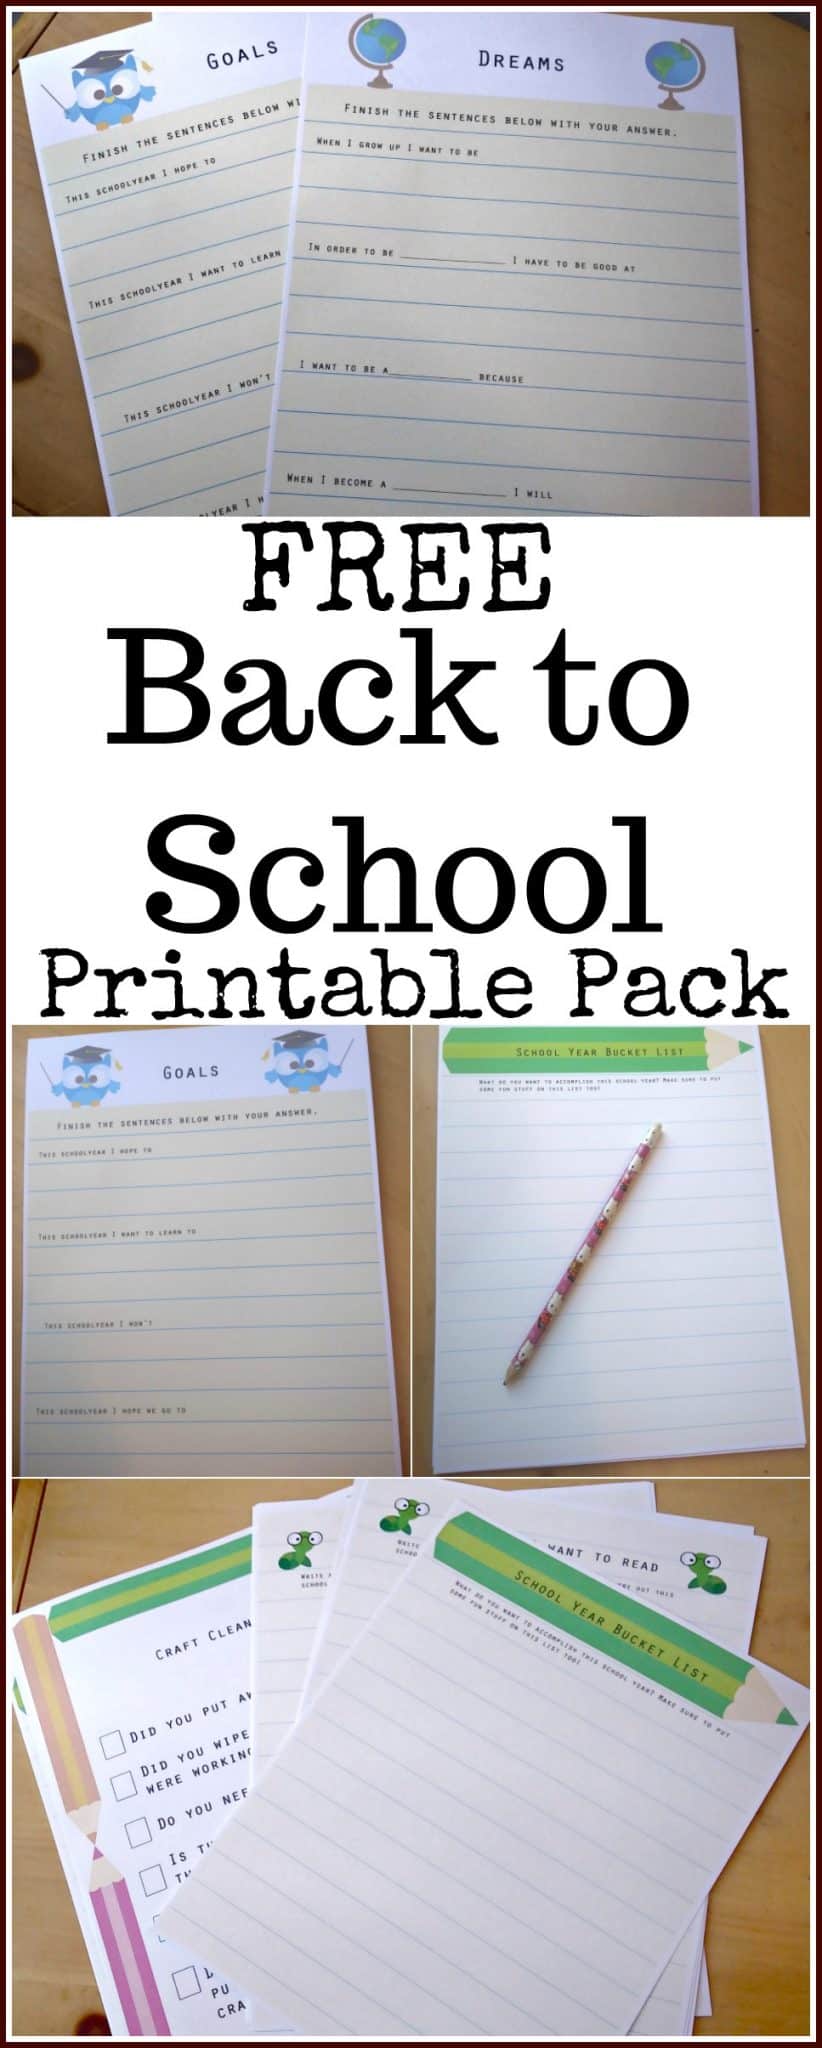 Free Back to School Printable Pack - Great for the classroom or for homeschool families! - #backtoschool #education #freeprintable #edchat #printable 